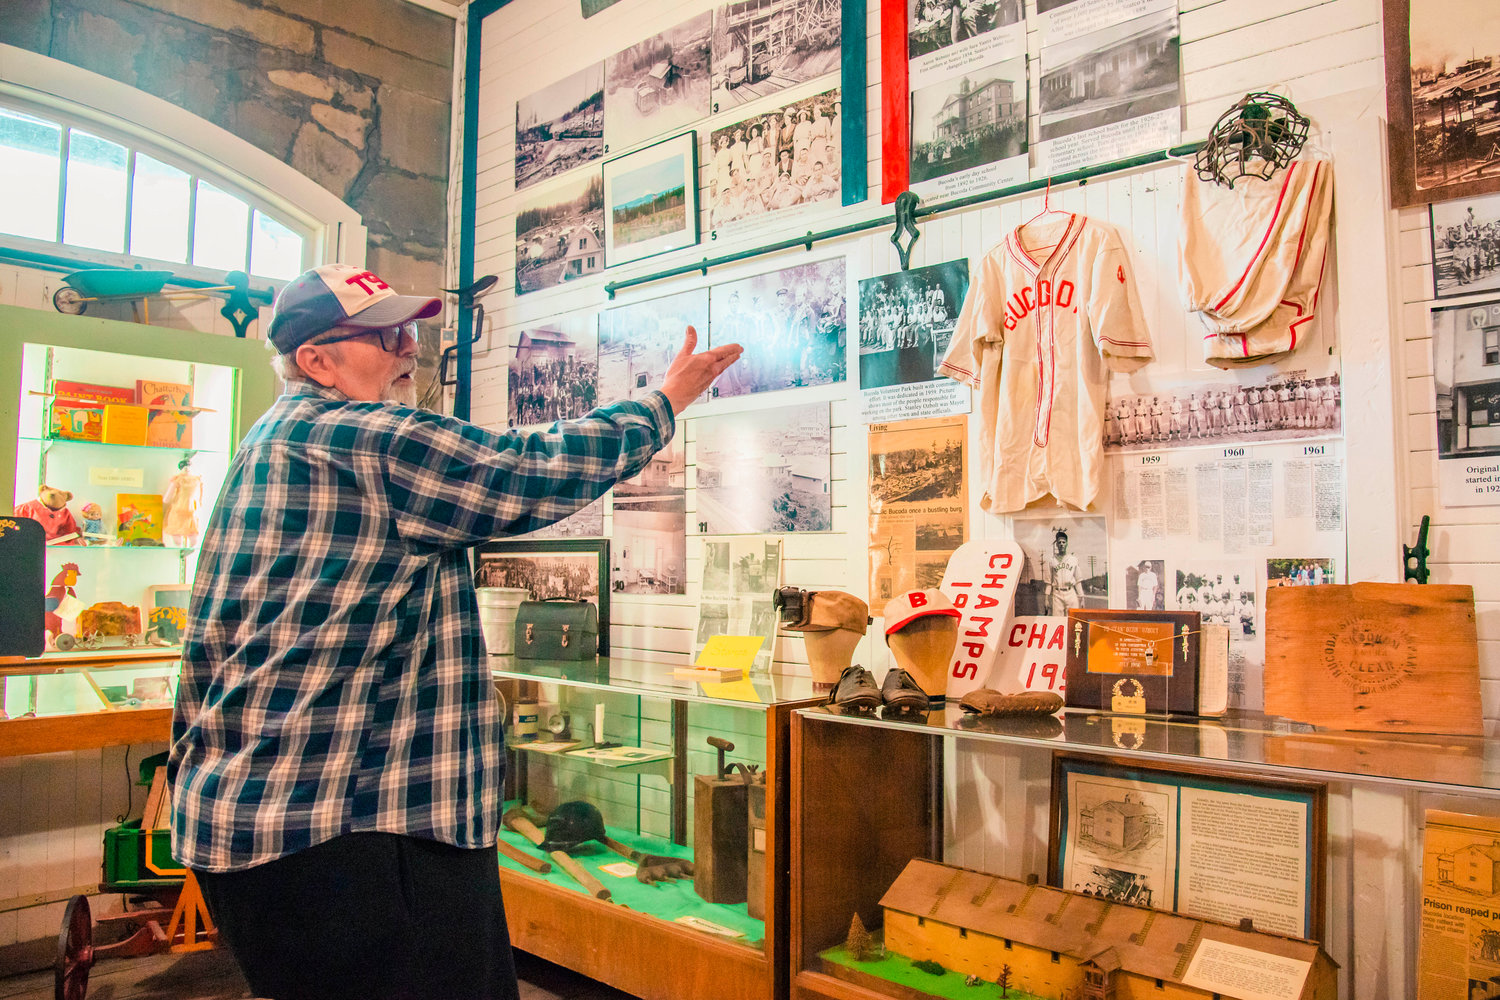 The Tenino Depot Museum is also home to historic items from other nearby towns. Tenino City Historian Richard Edwards points to Bucoda baseball equipment on display in one room of the museum.